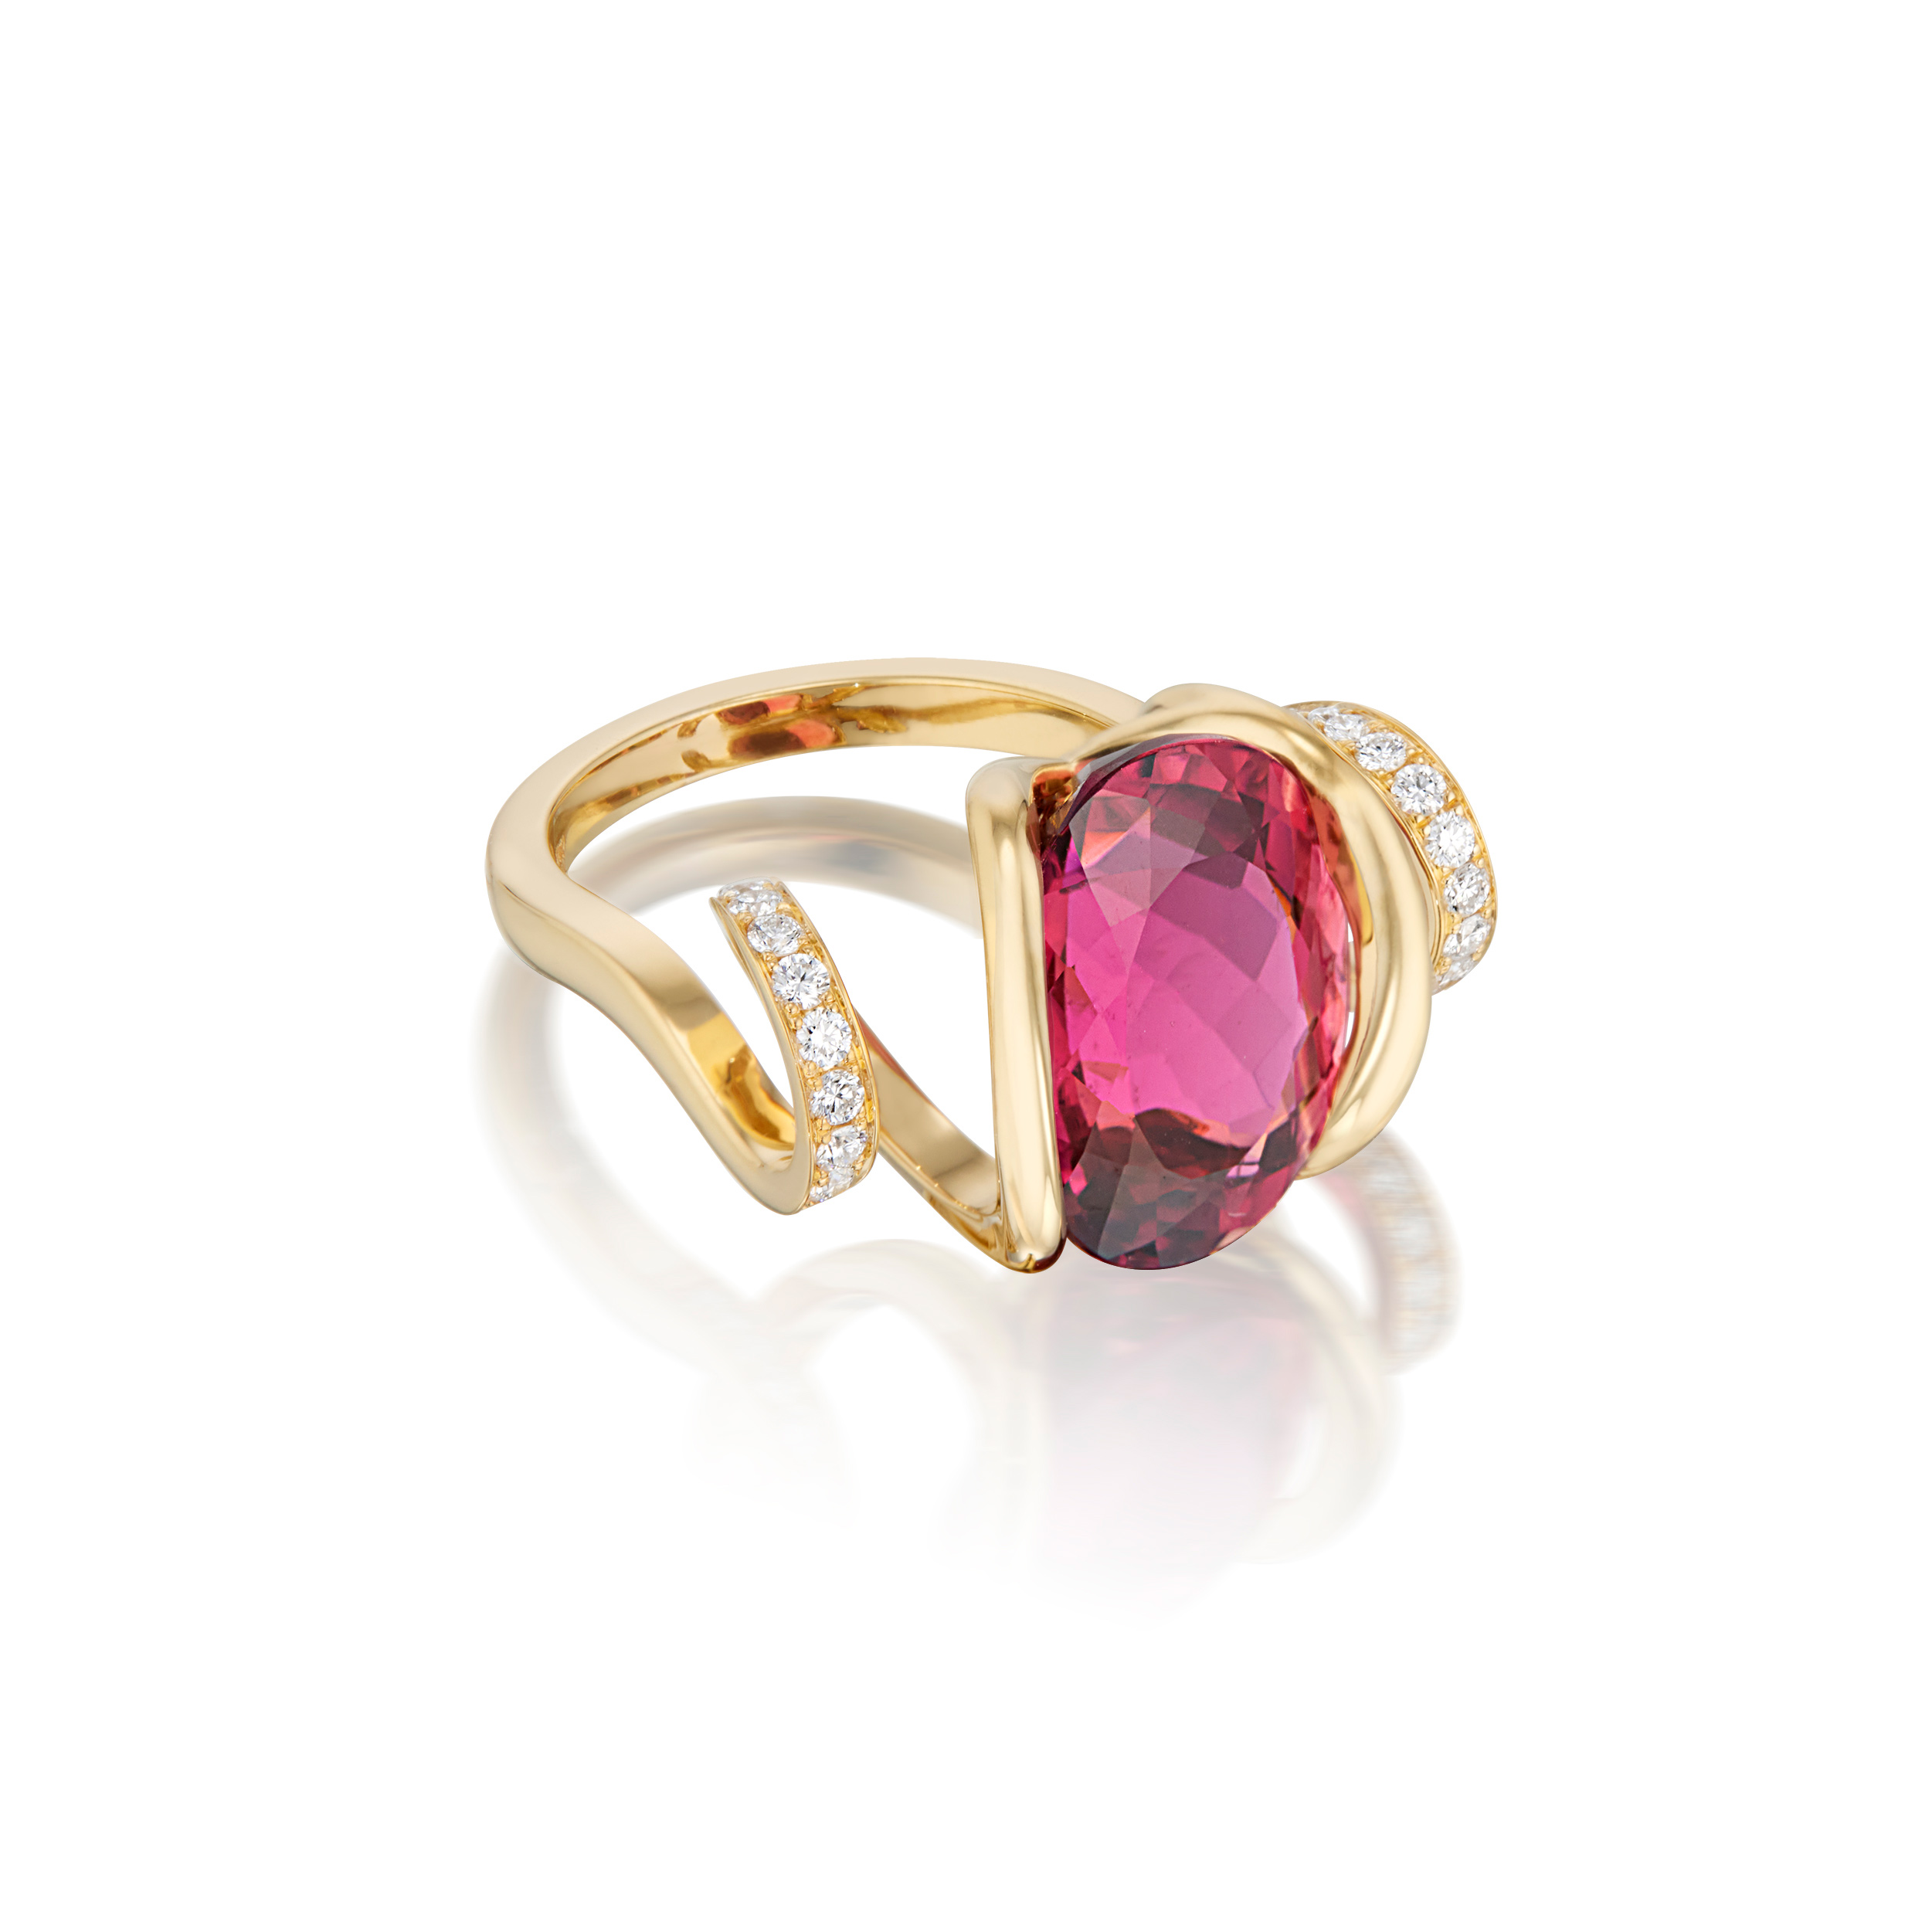 This is a 3/4 view of Renisis by Sardwell's Fire Curl Ring with pink tourmaline center and 18K yellow gold with pavé diamonds. You can clearly see the many facets in the pink gem stone. Its unique design featured a curled body and setting.